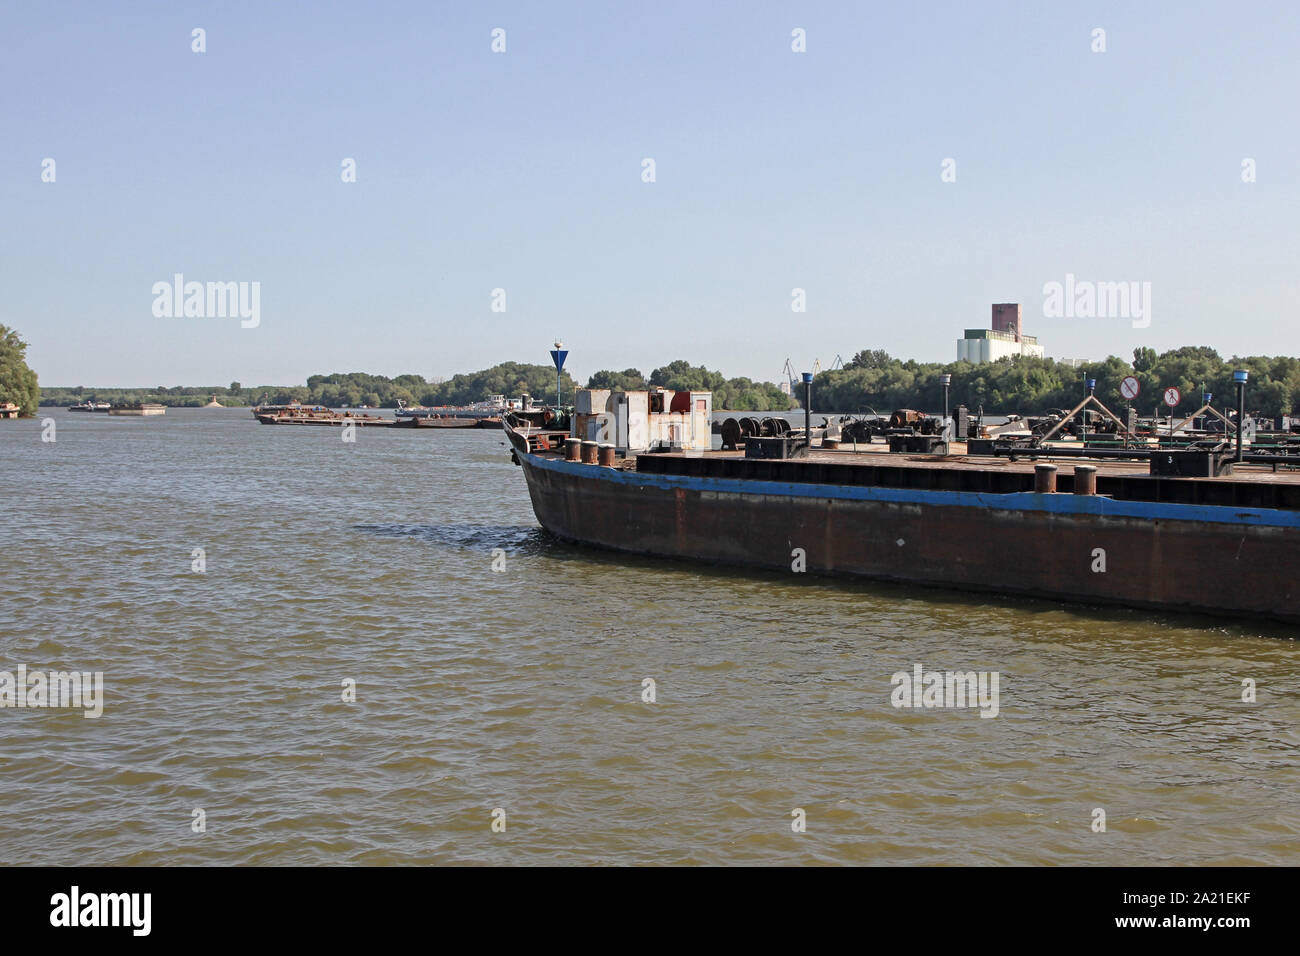 View of tanker on Danube River near Belgrade with forest trees on shore, Danube River, Serbia. Stock Photo